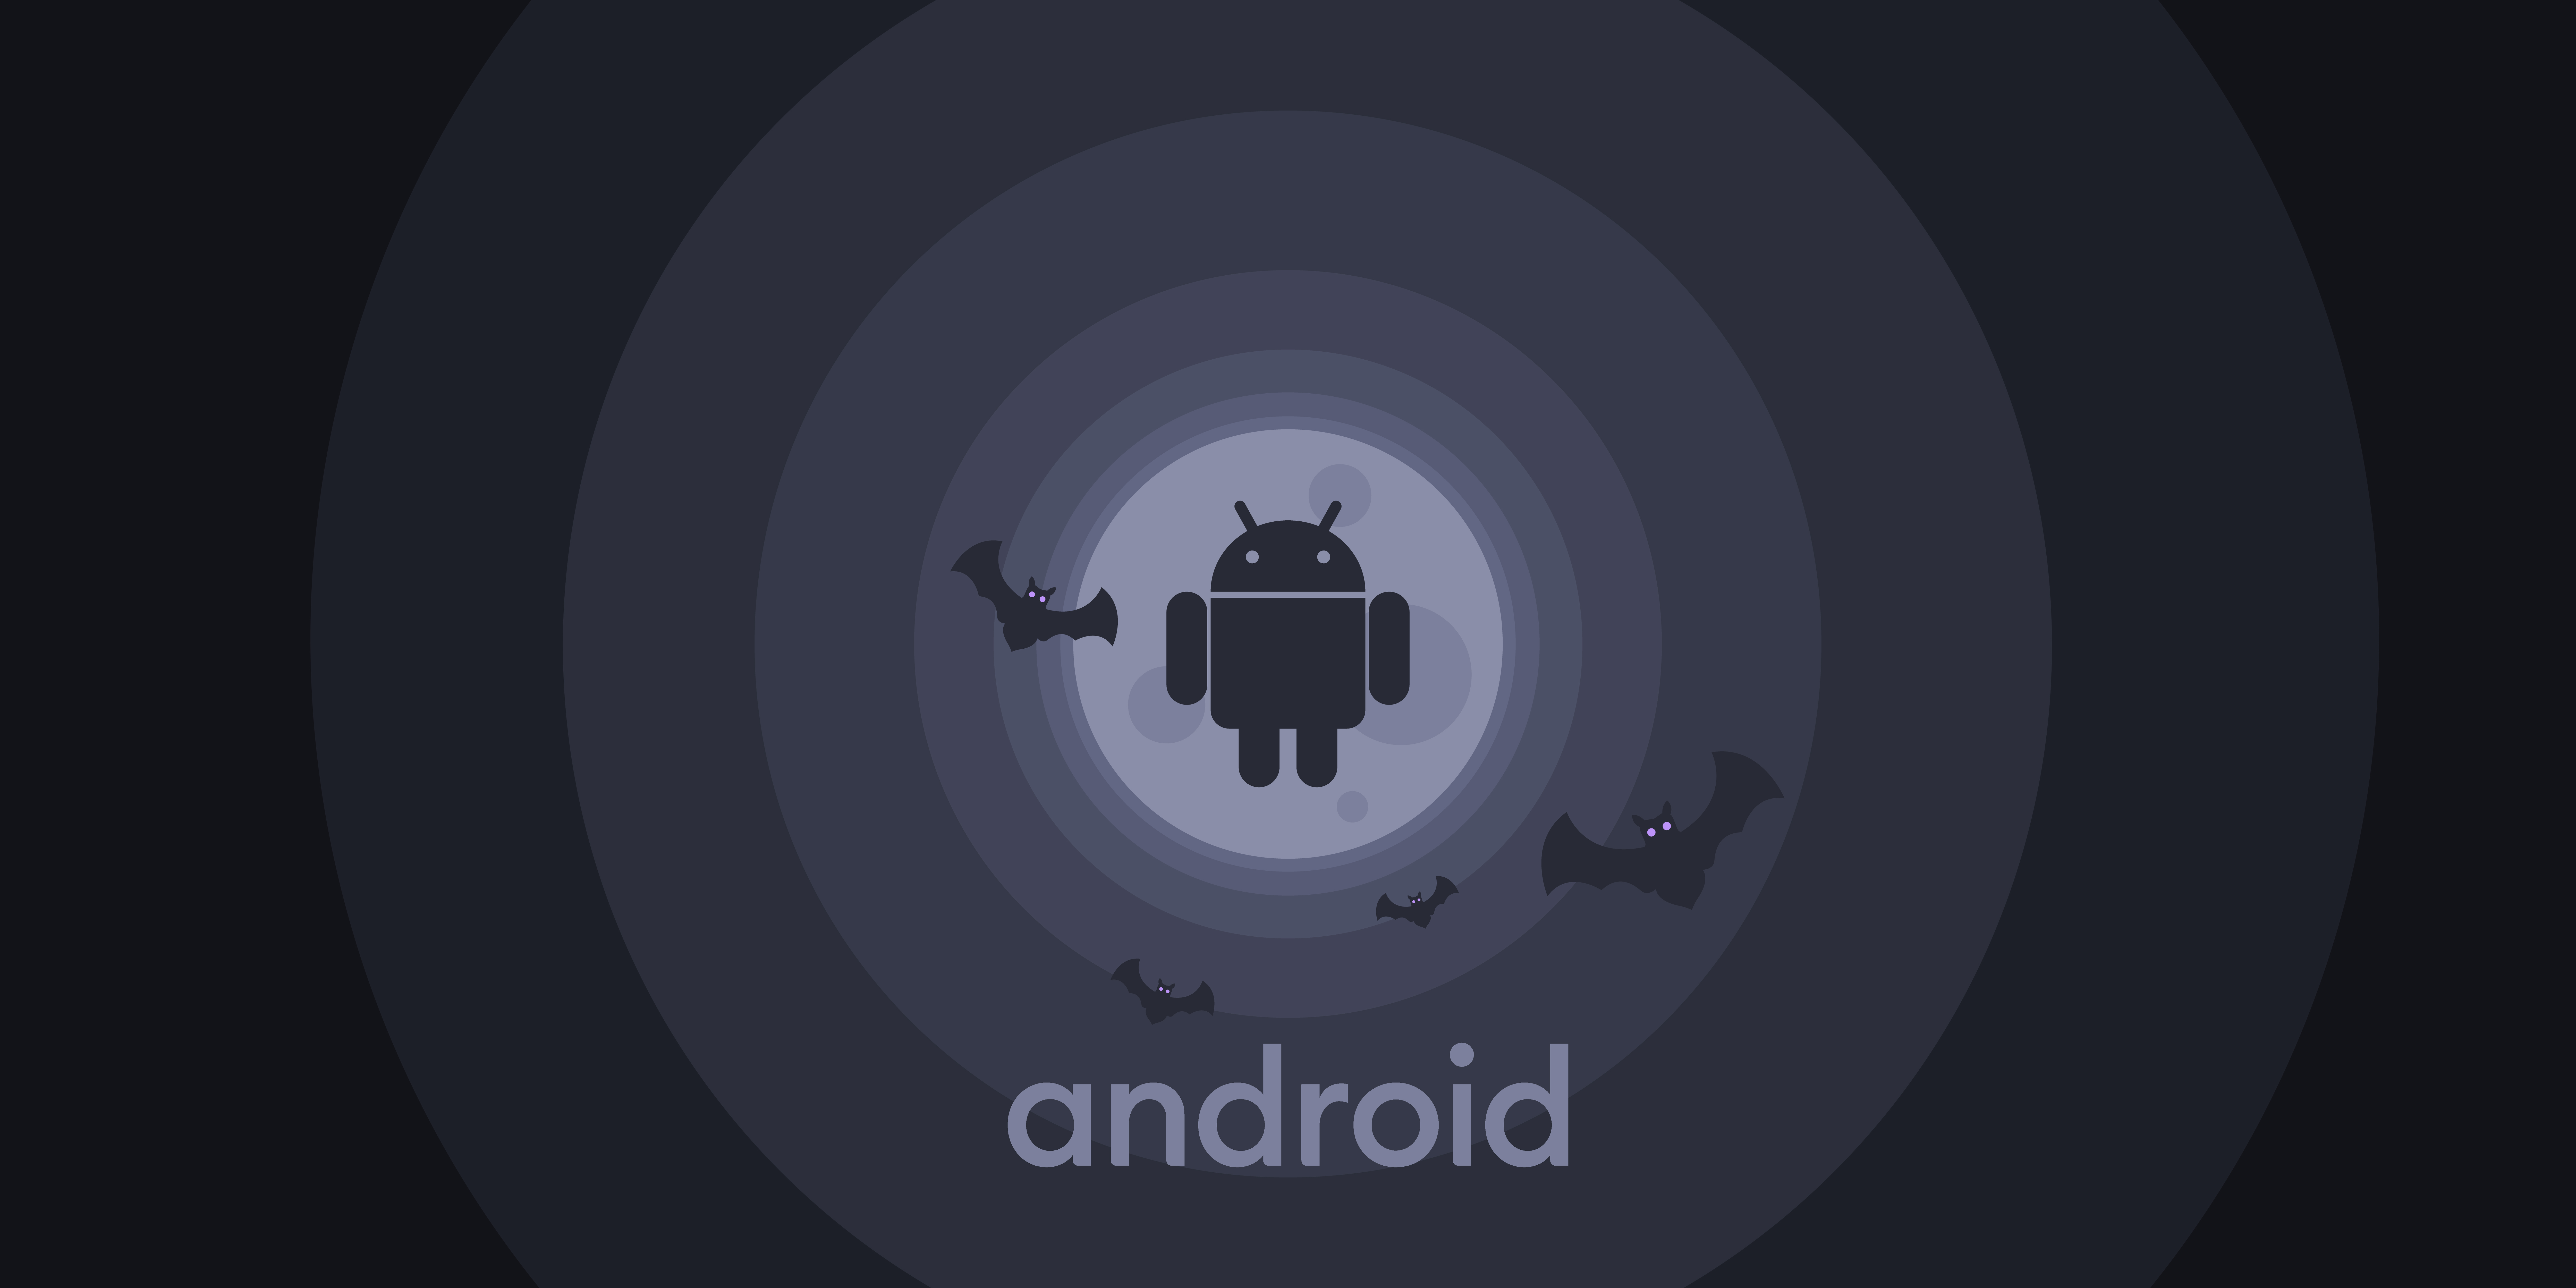 General 12000x6000 android 13 Android L Android (operating system) robot minimalism logo operating system material minimal simple background material style dark background bats Moon